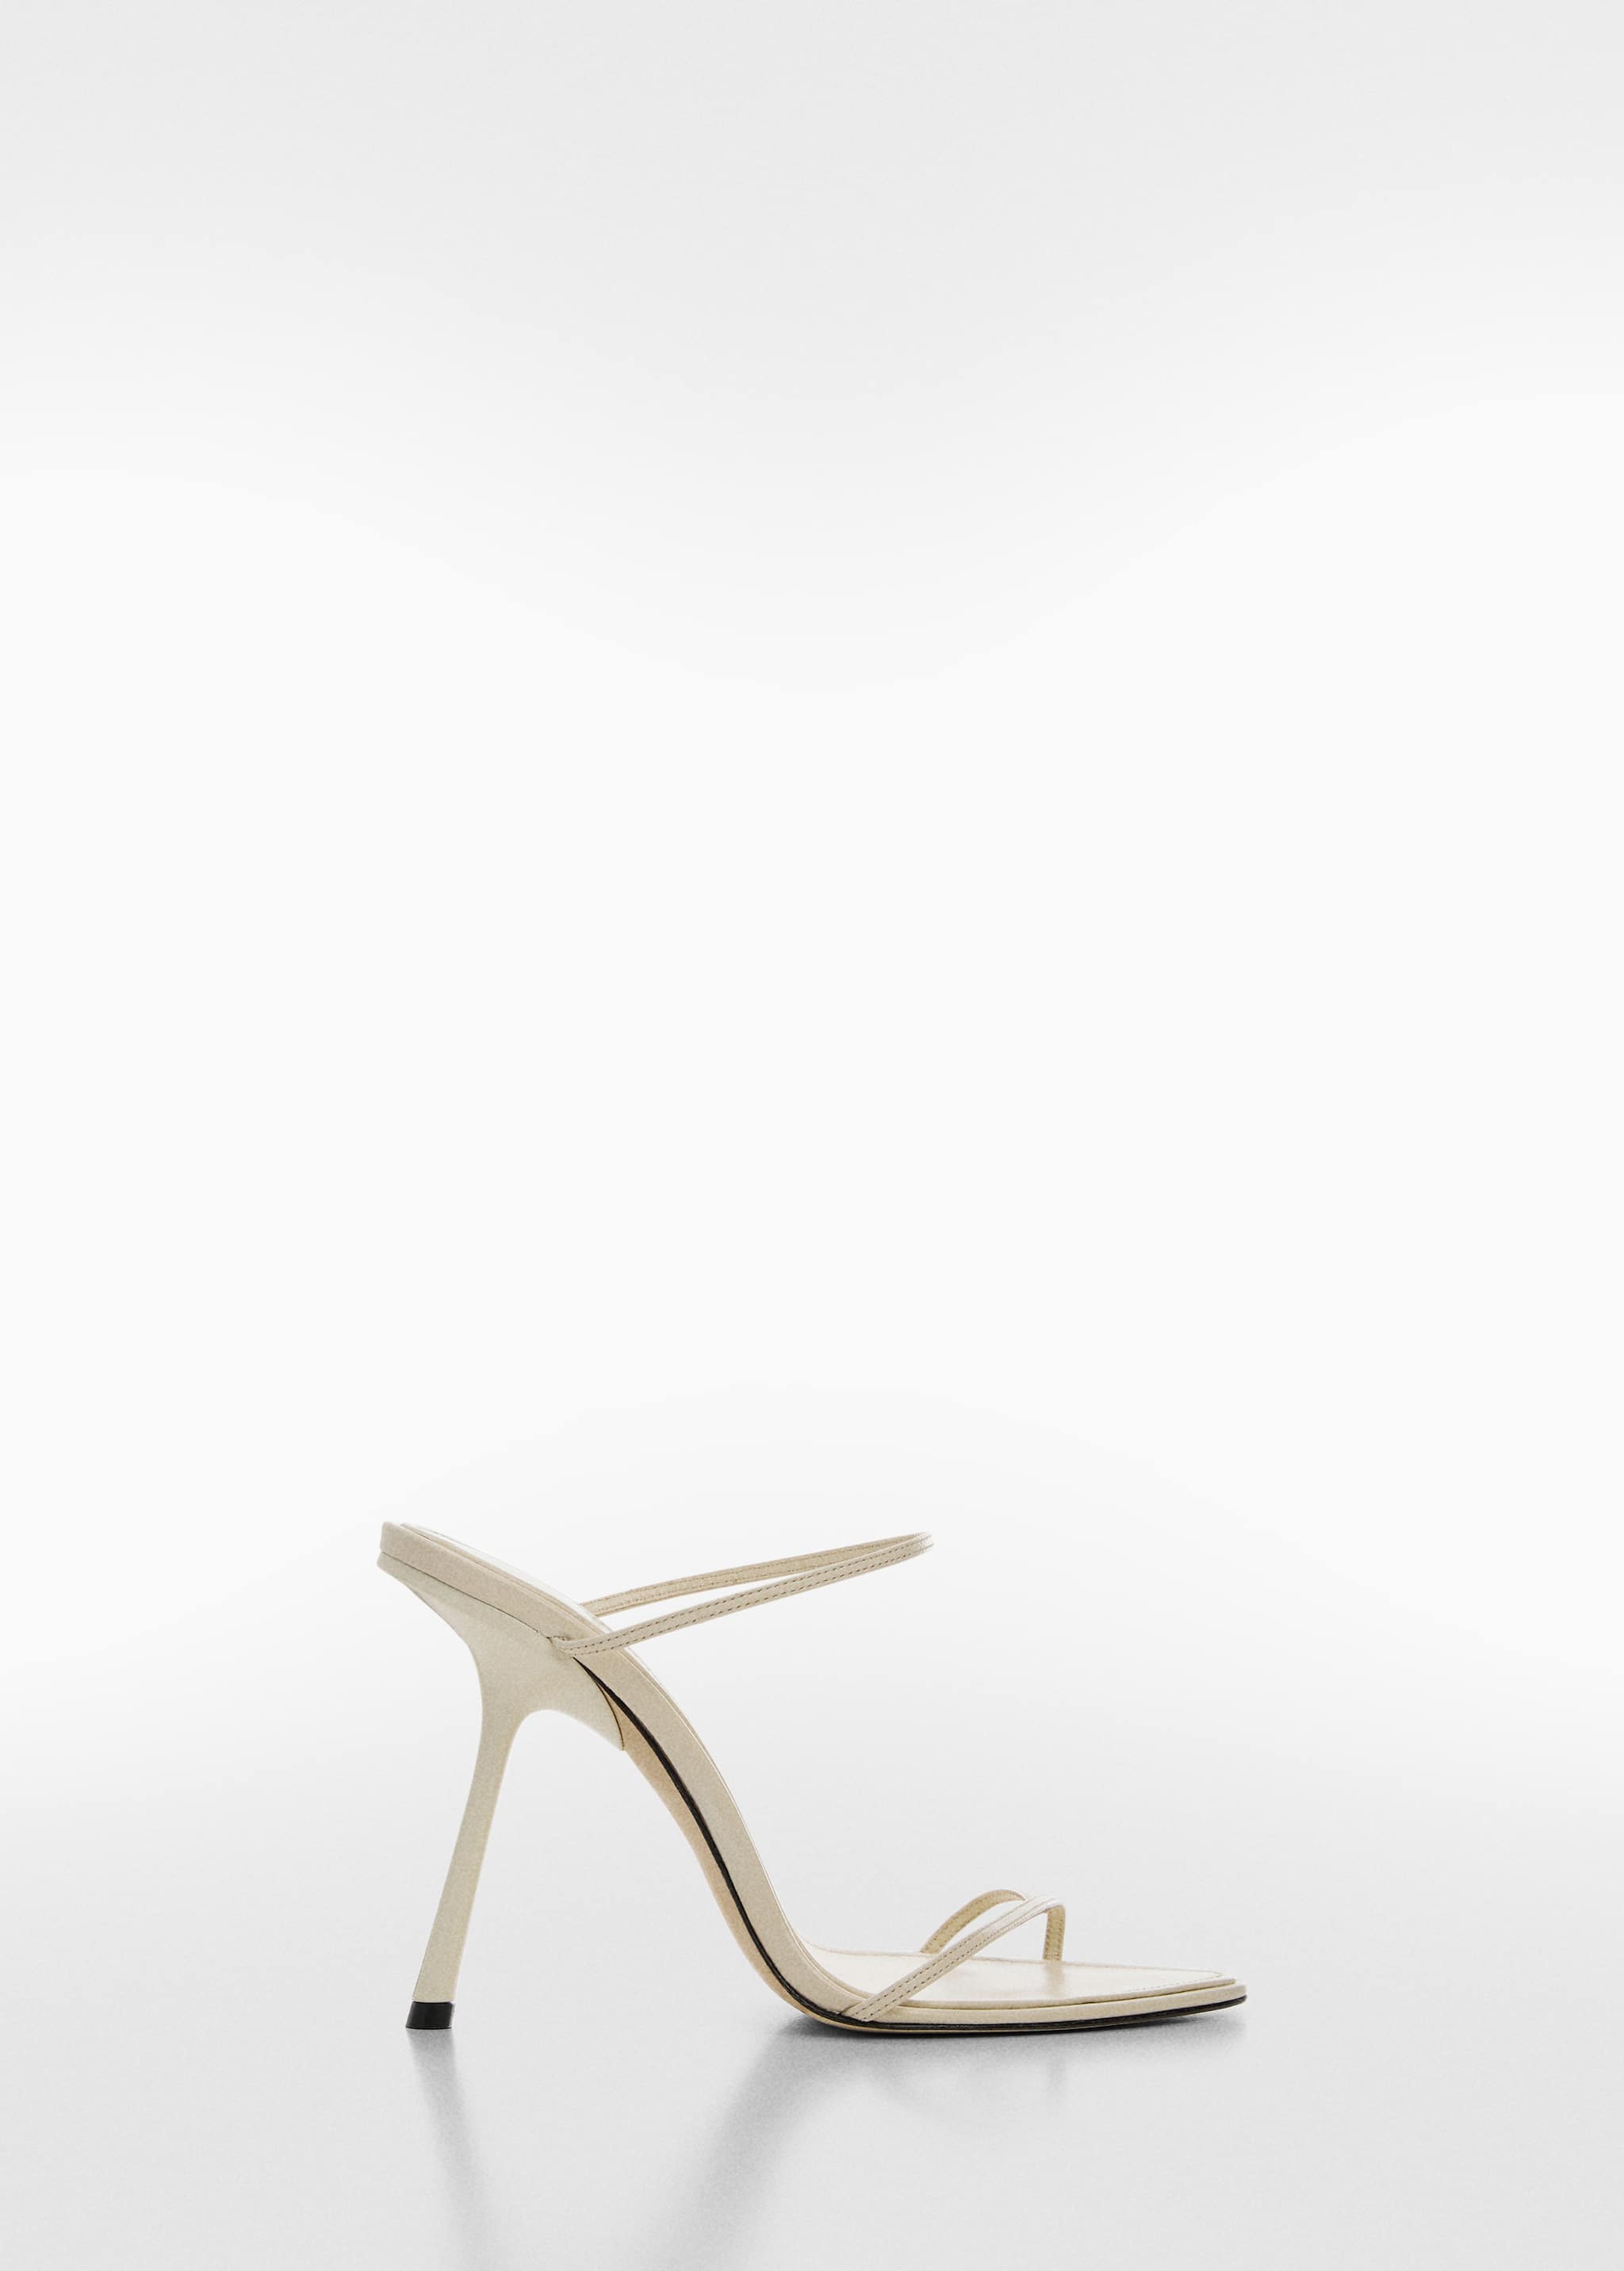 Leather sandal with inclined heel - Article without model